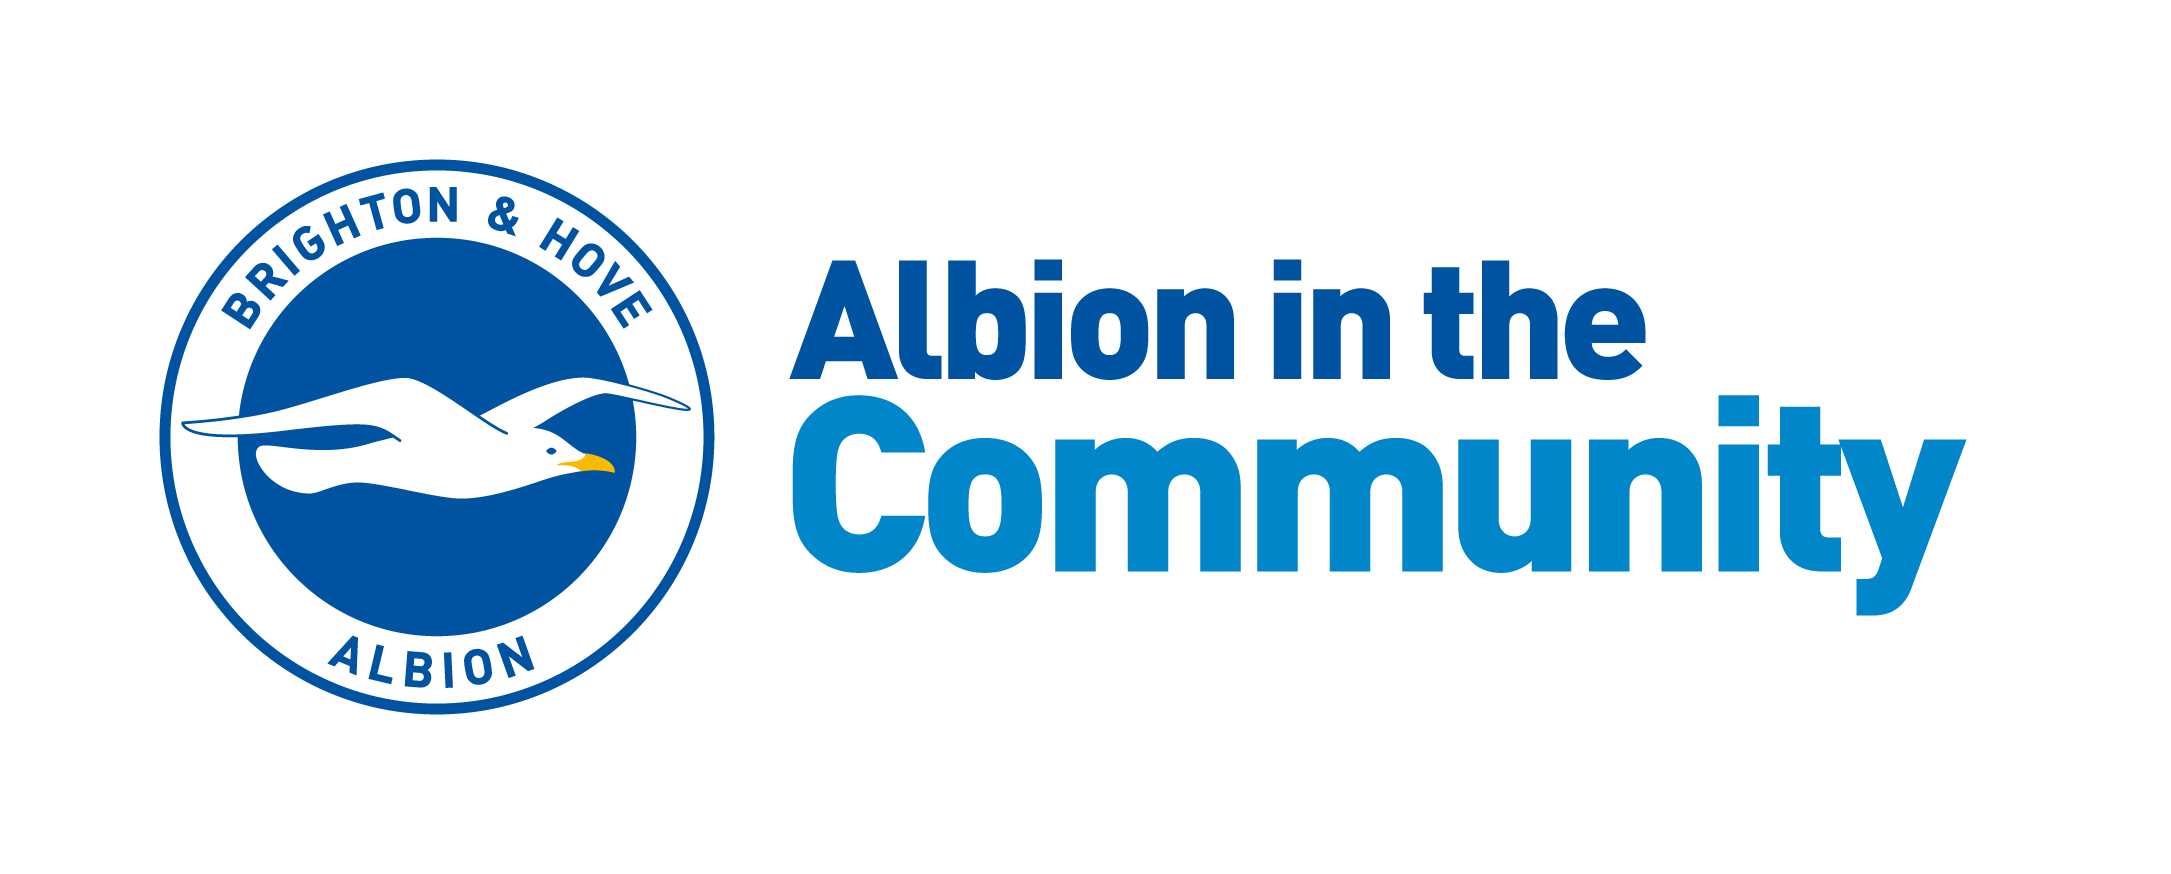 Festival picks Albion in the Community as charity for 2018 event